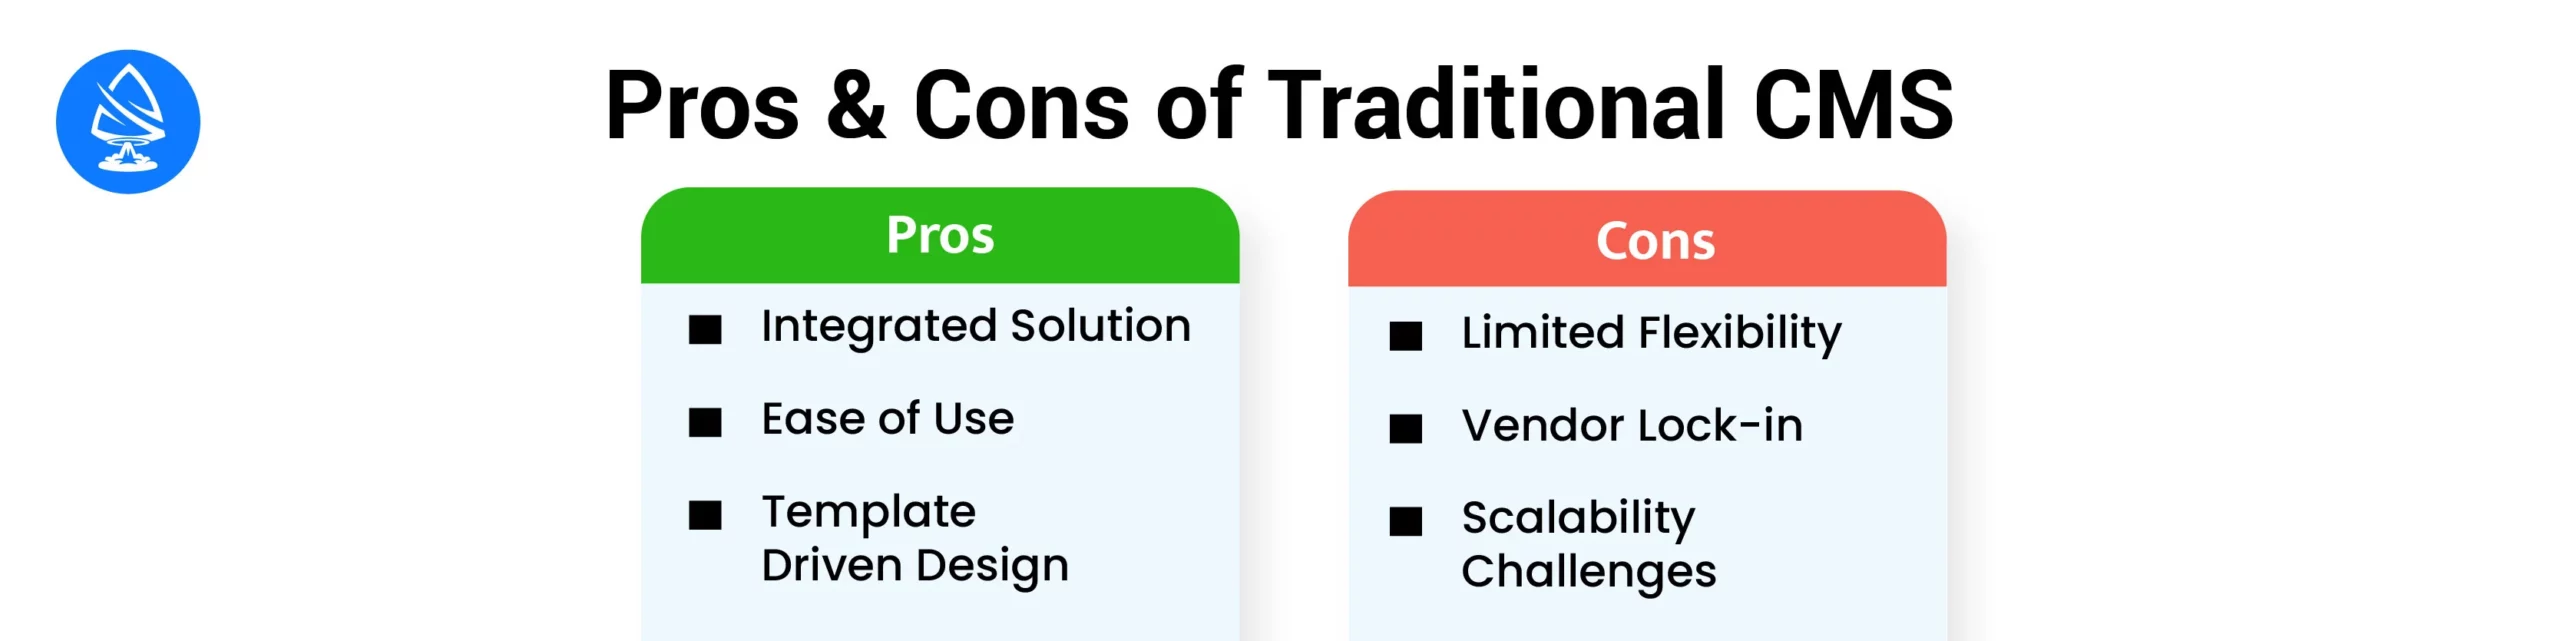 Pros and cons of traditional CMS